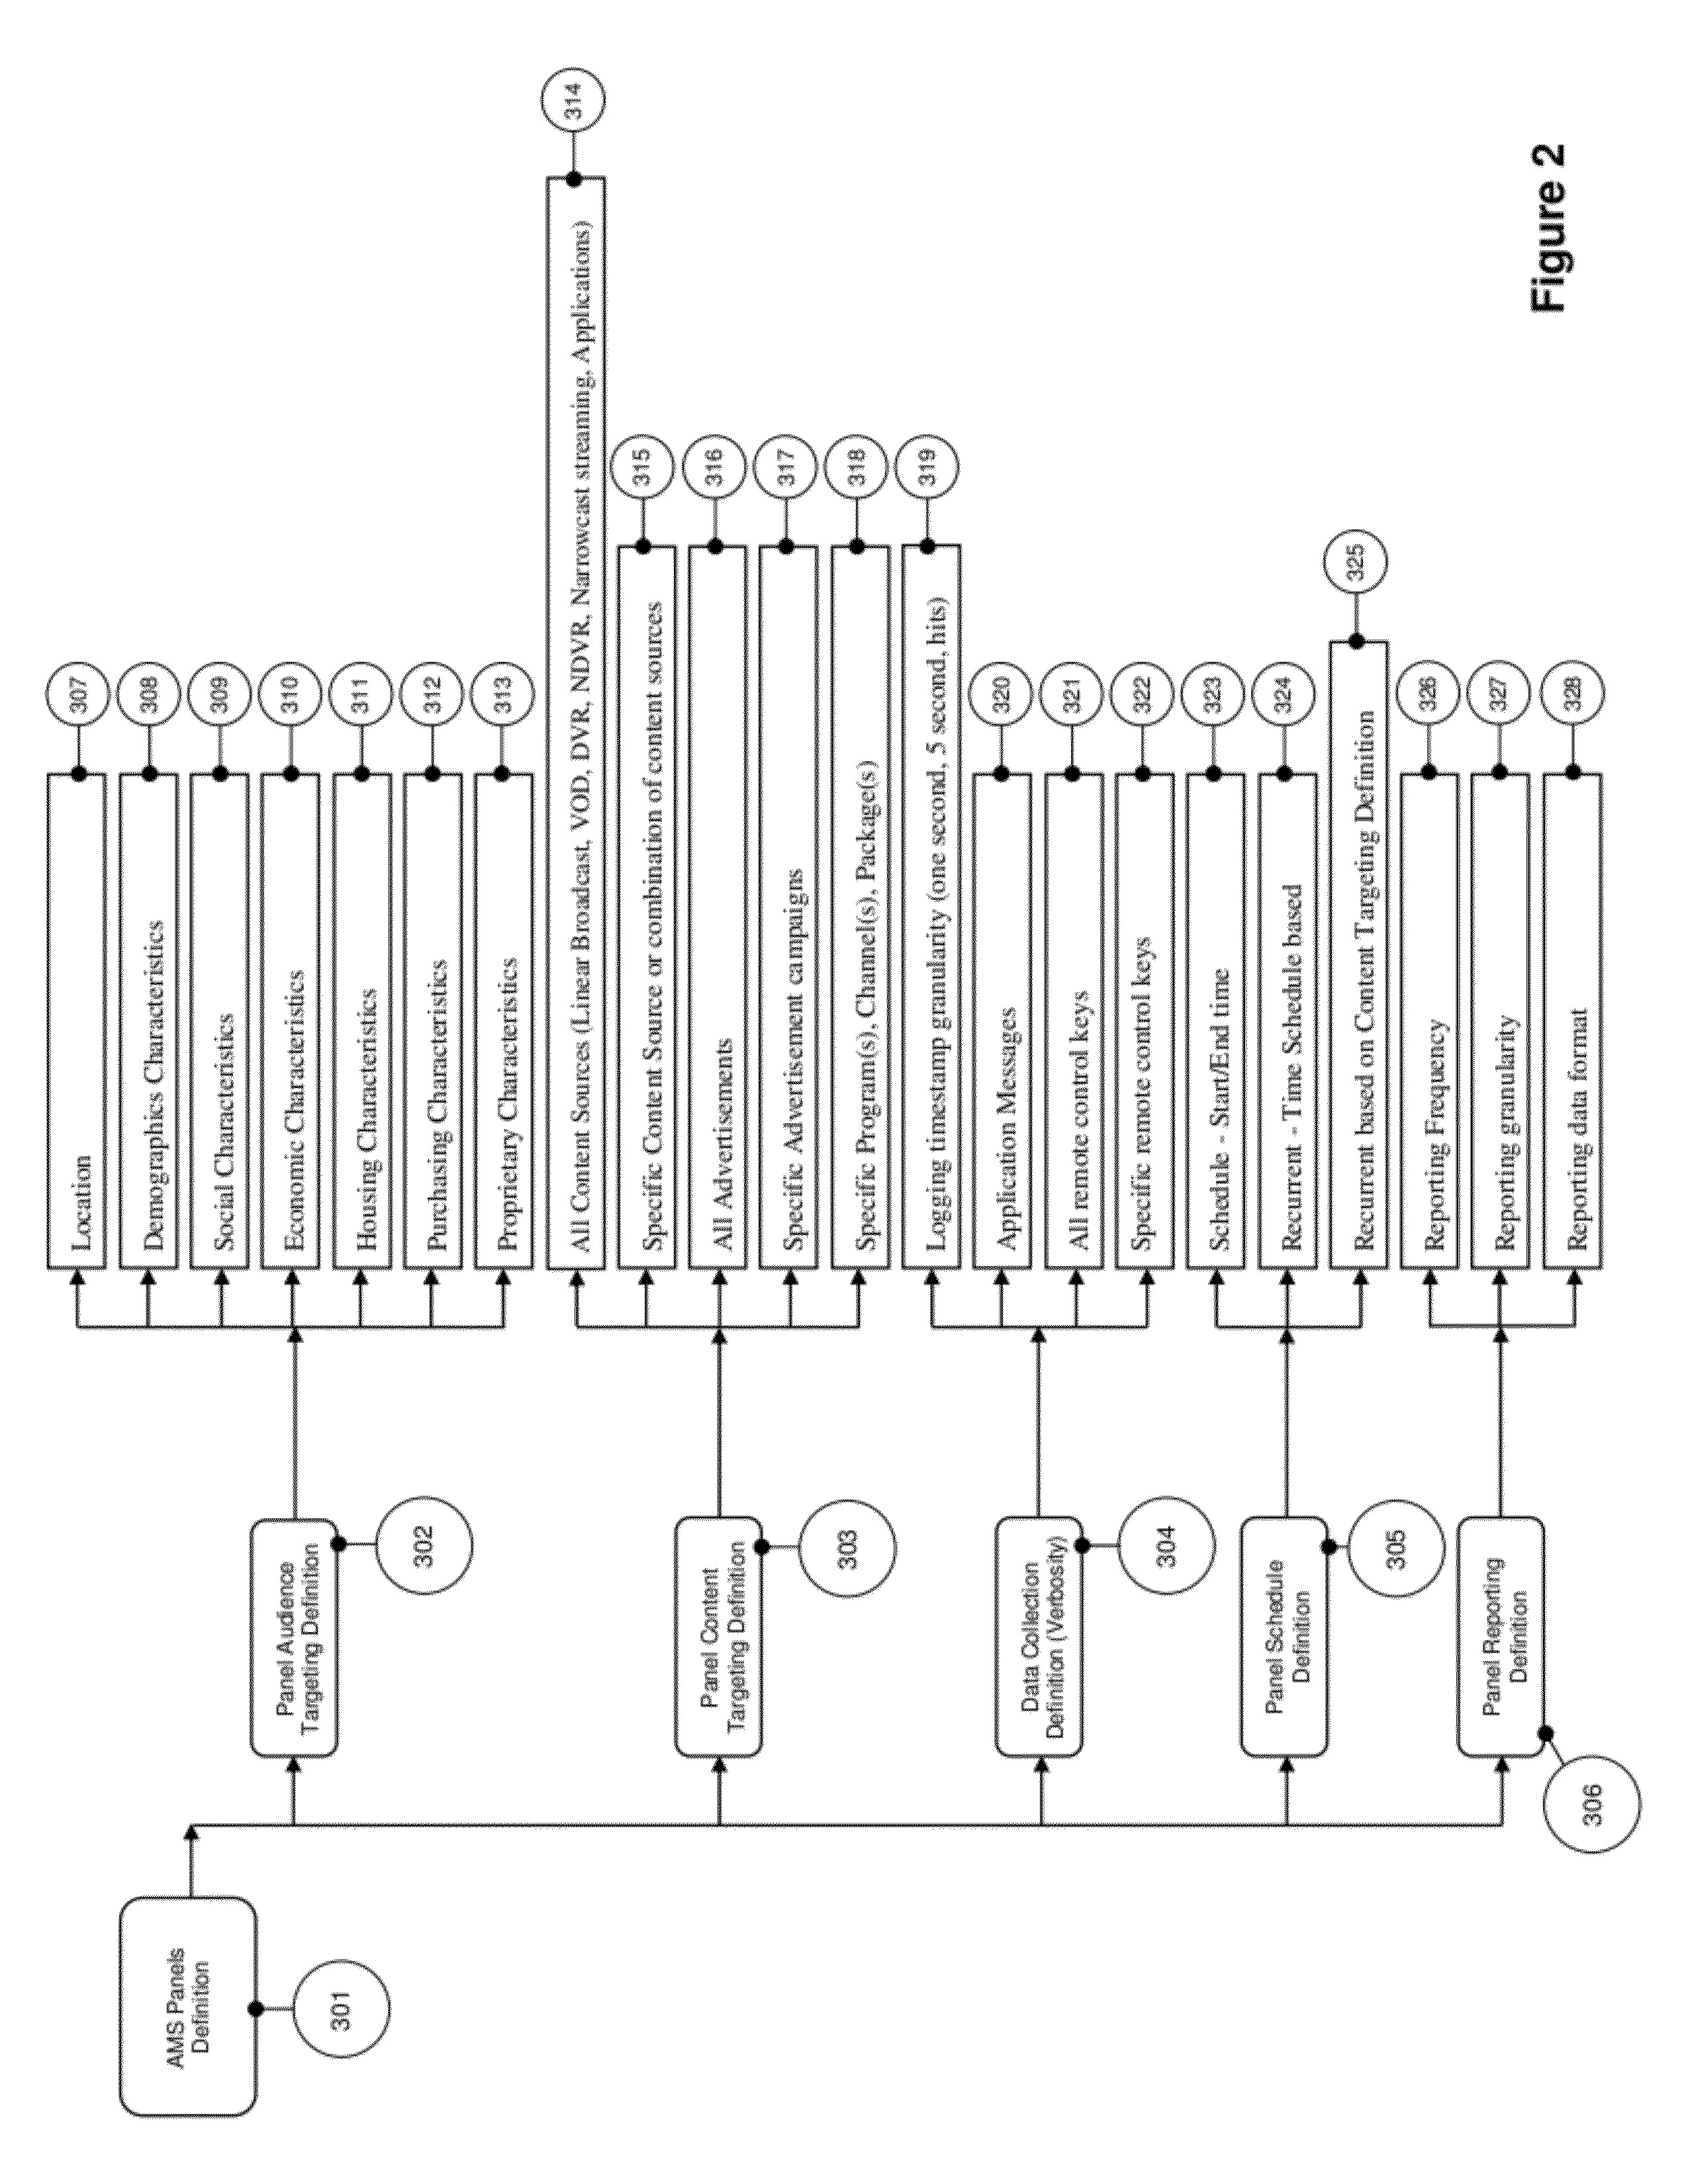 System and method for scalable, high accuracy, sensor and id based audience measurement system based on distributed computing architecture